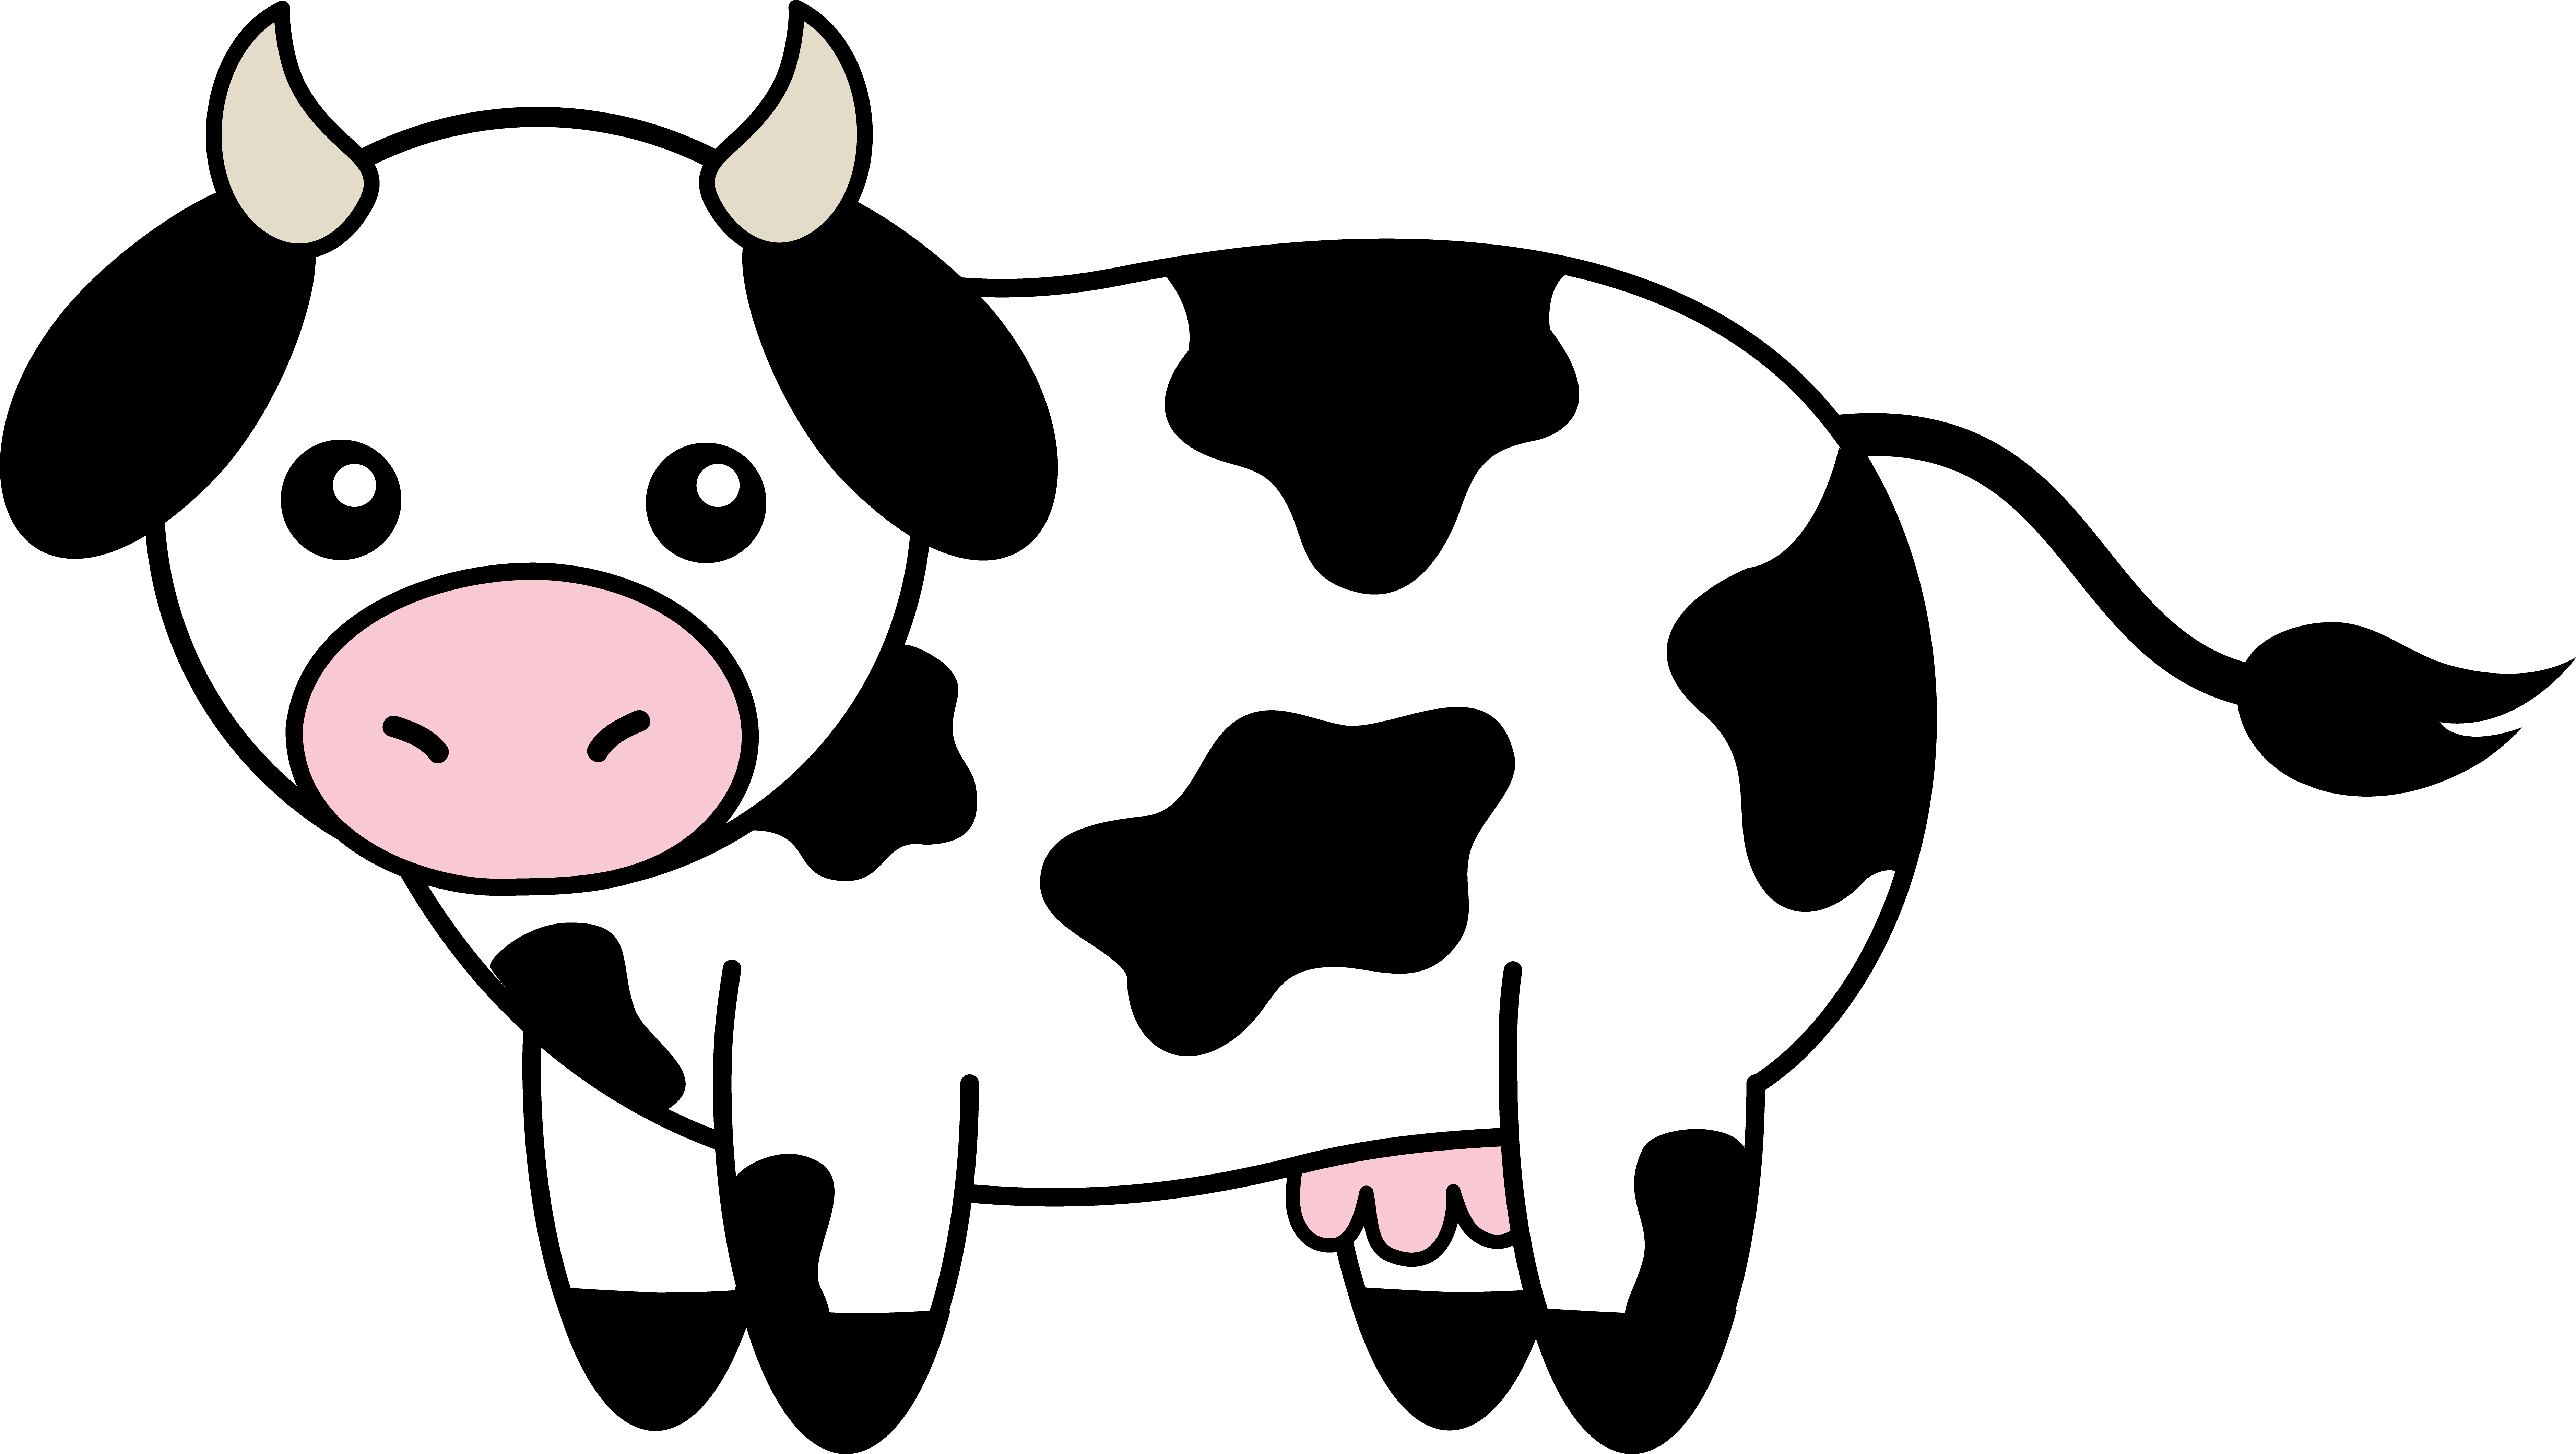 Kawaii clipart cow, Kawaii cow Transparent FREE for download on WebStockReview 2020